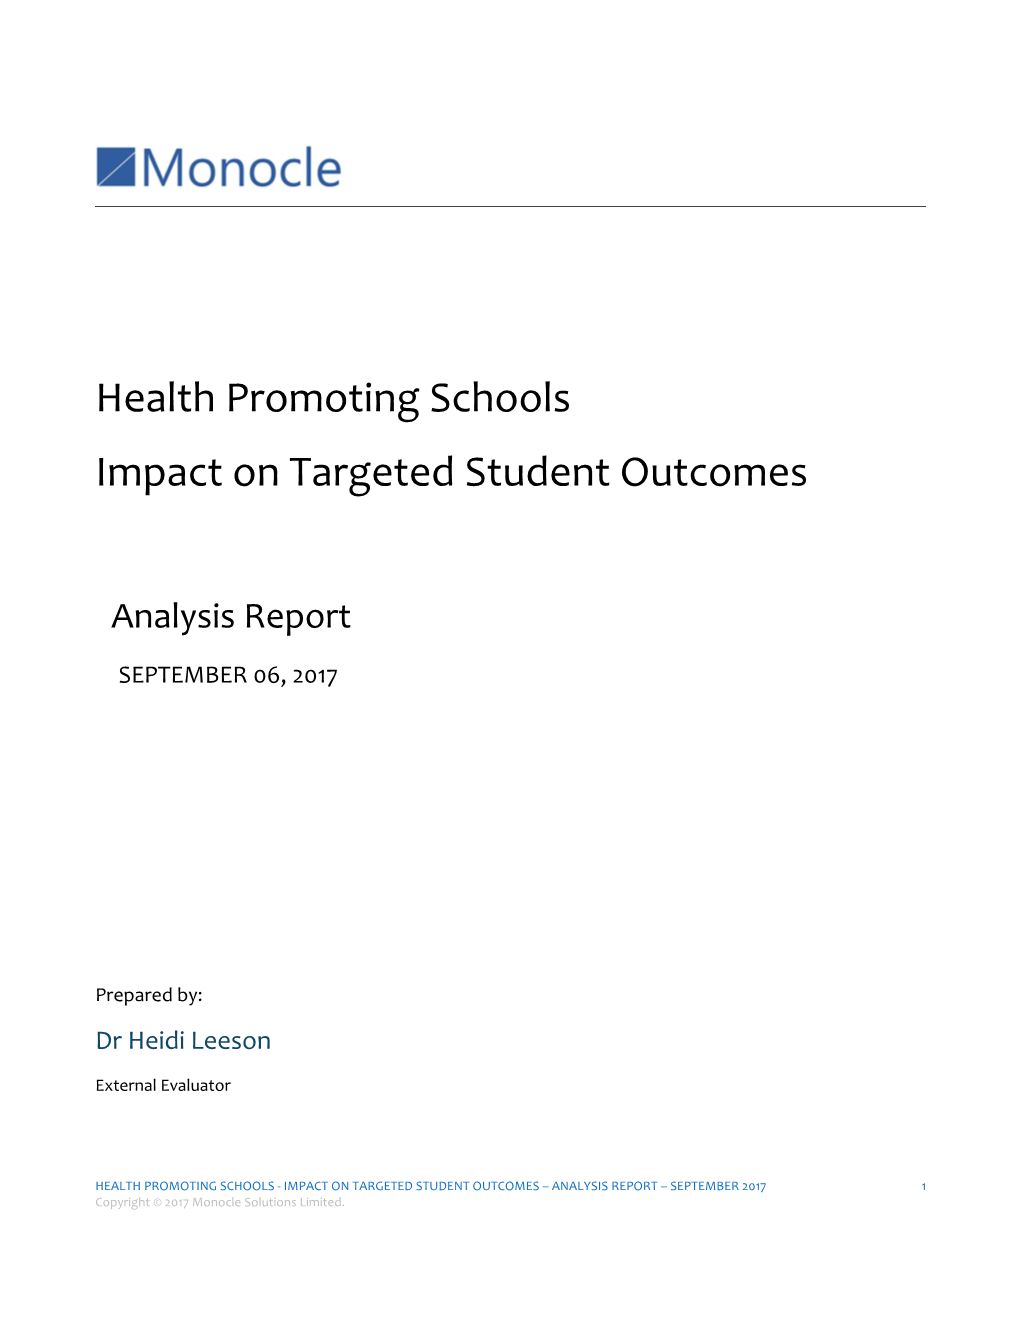 Health Promoting Schools Impact on Targeted Student Outcomes: Analysis Report